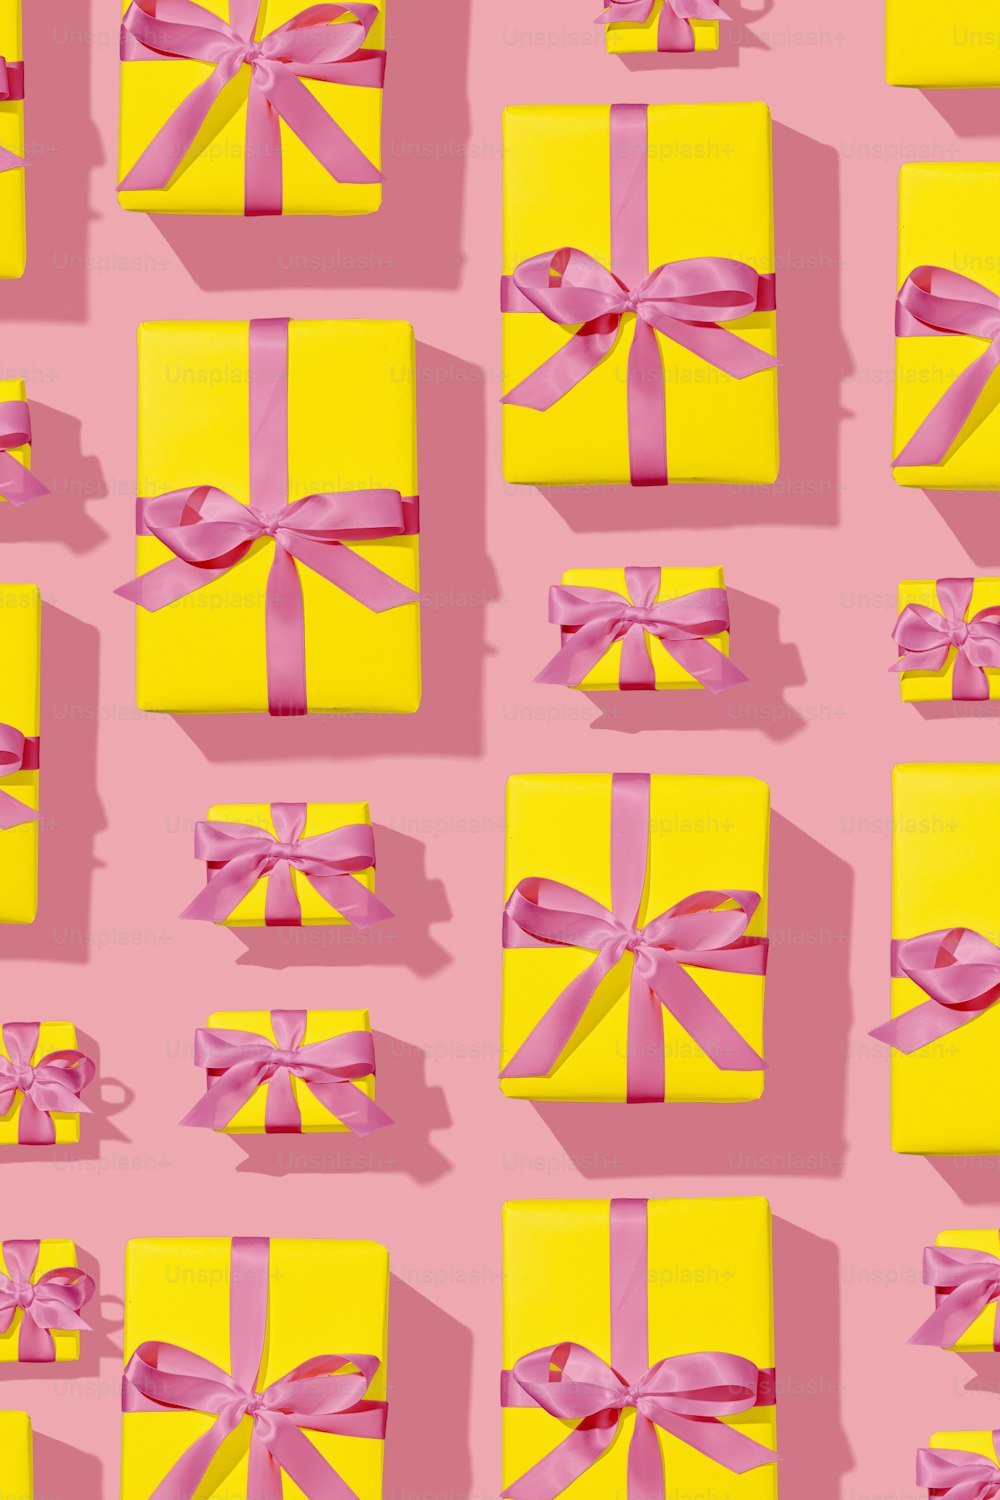 a yellow box with a pink bow on a pink background